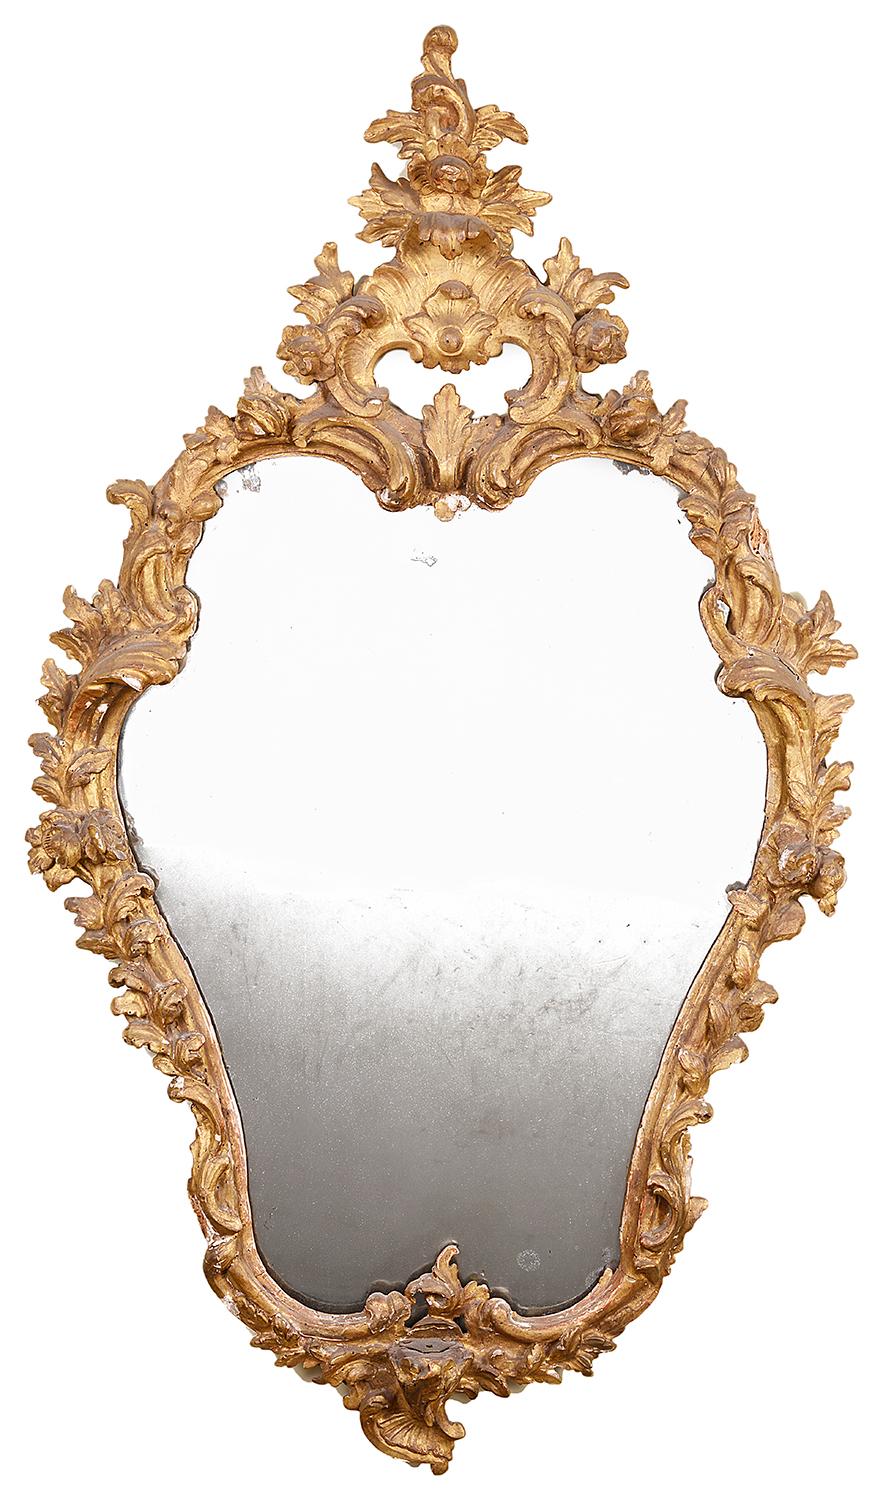 A very pleasing pair of 18th century Italian carved giltwood pier glass wall mirrors, each with carved scrolling foliate and floral decoration, both with their original mirror plates.
Measures: 94cm (37